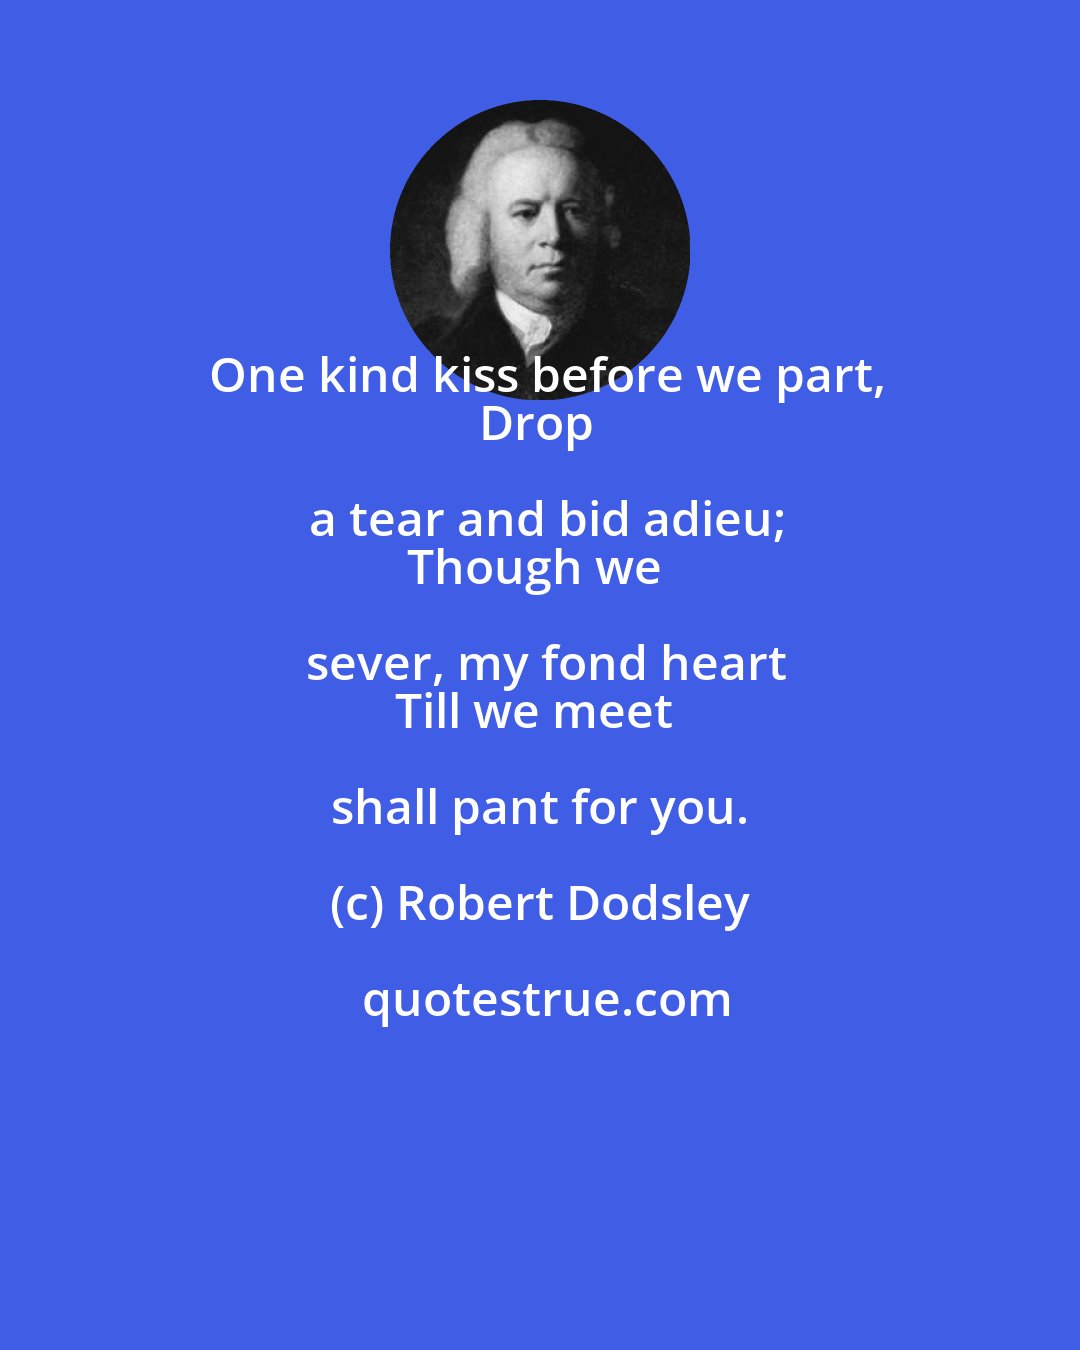 Robert Dodsley: One kind kiss before we part,
Drop a tear and bid adieu;
Though we sever, my fond heart
Till we meet shall pant for you.